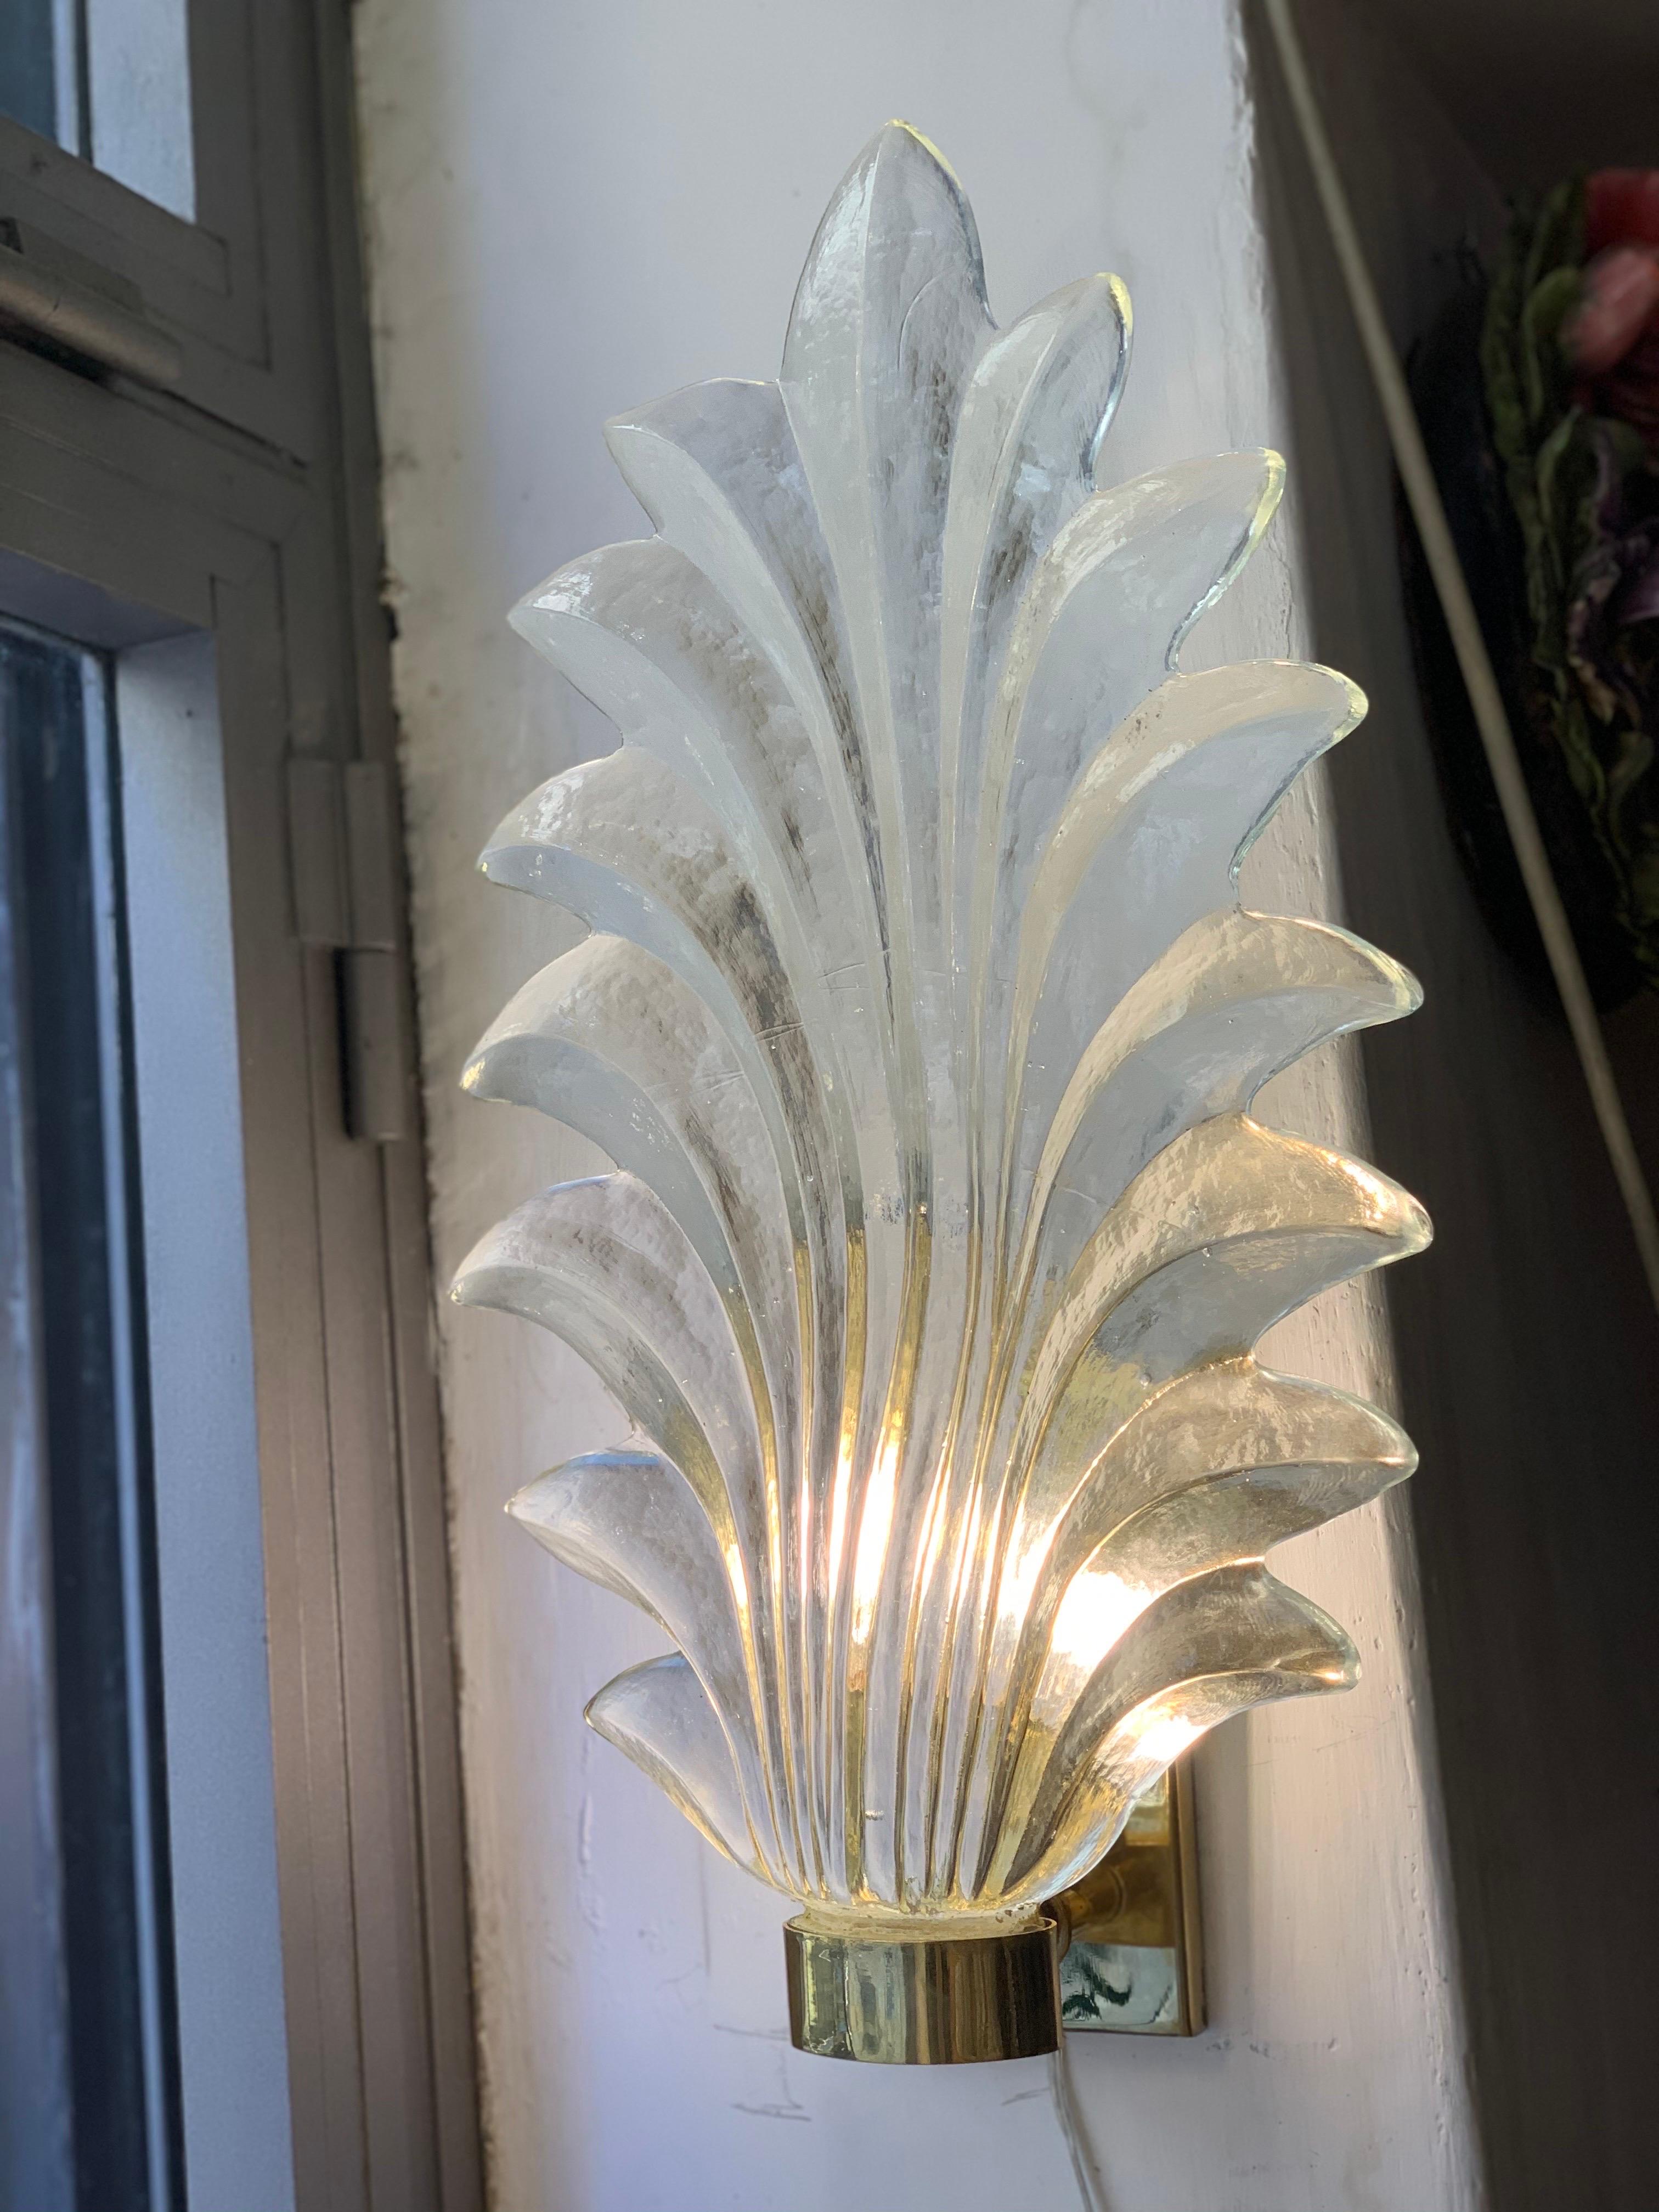 Pair of Clear Murano glass leaf sconces, brass structure, one bulb each lamp. These sconces are in Murano hand blown thick clear glass.